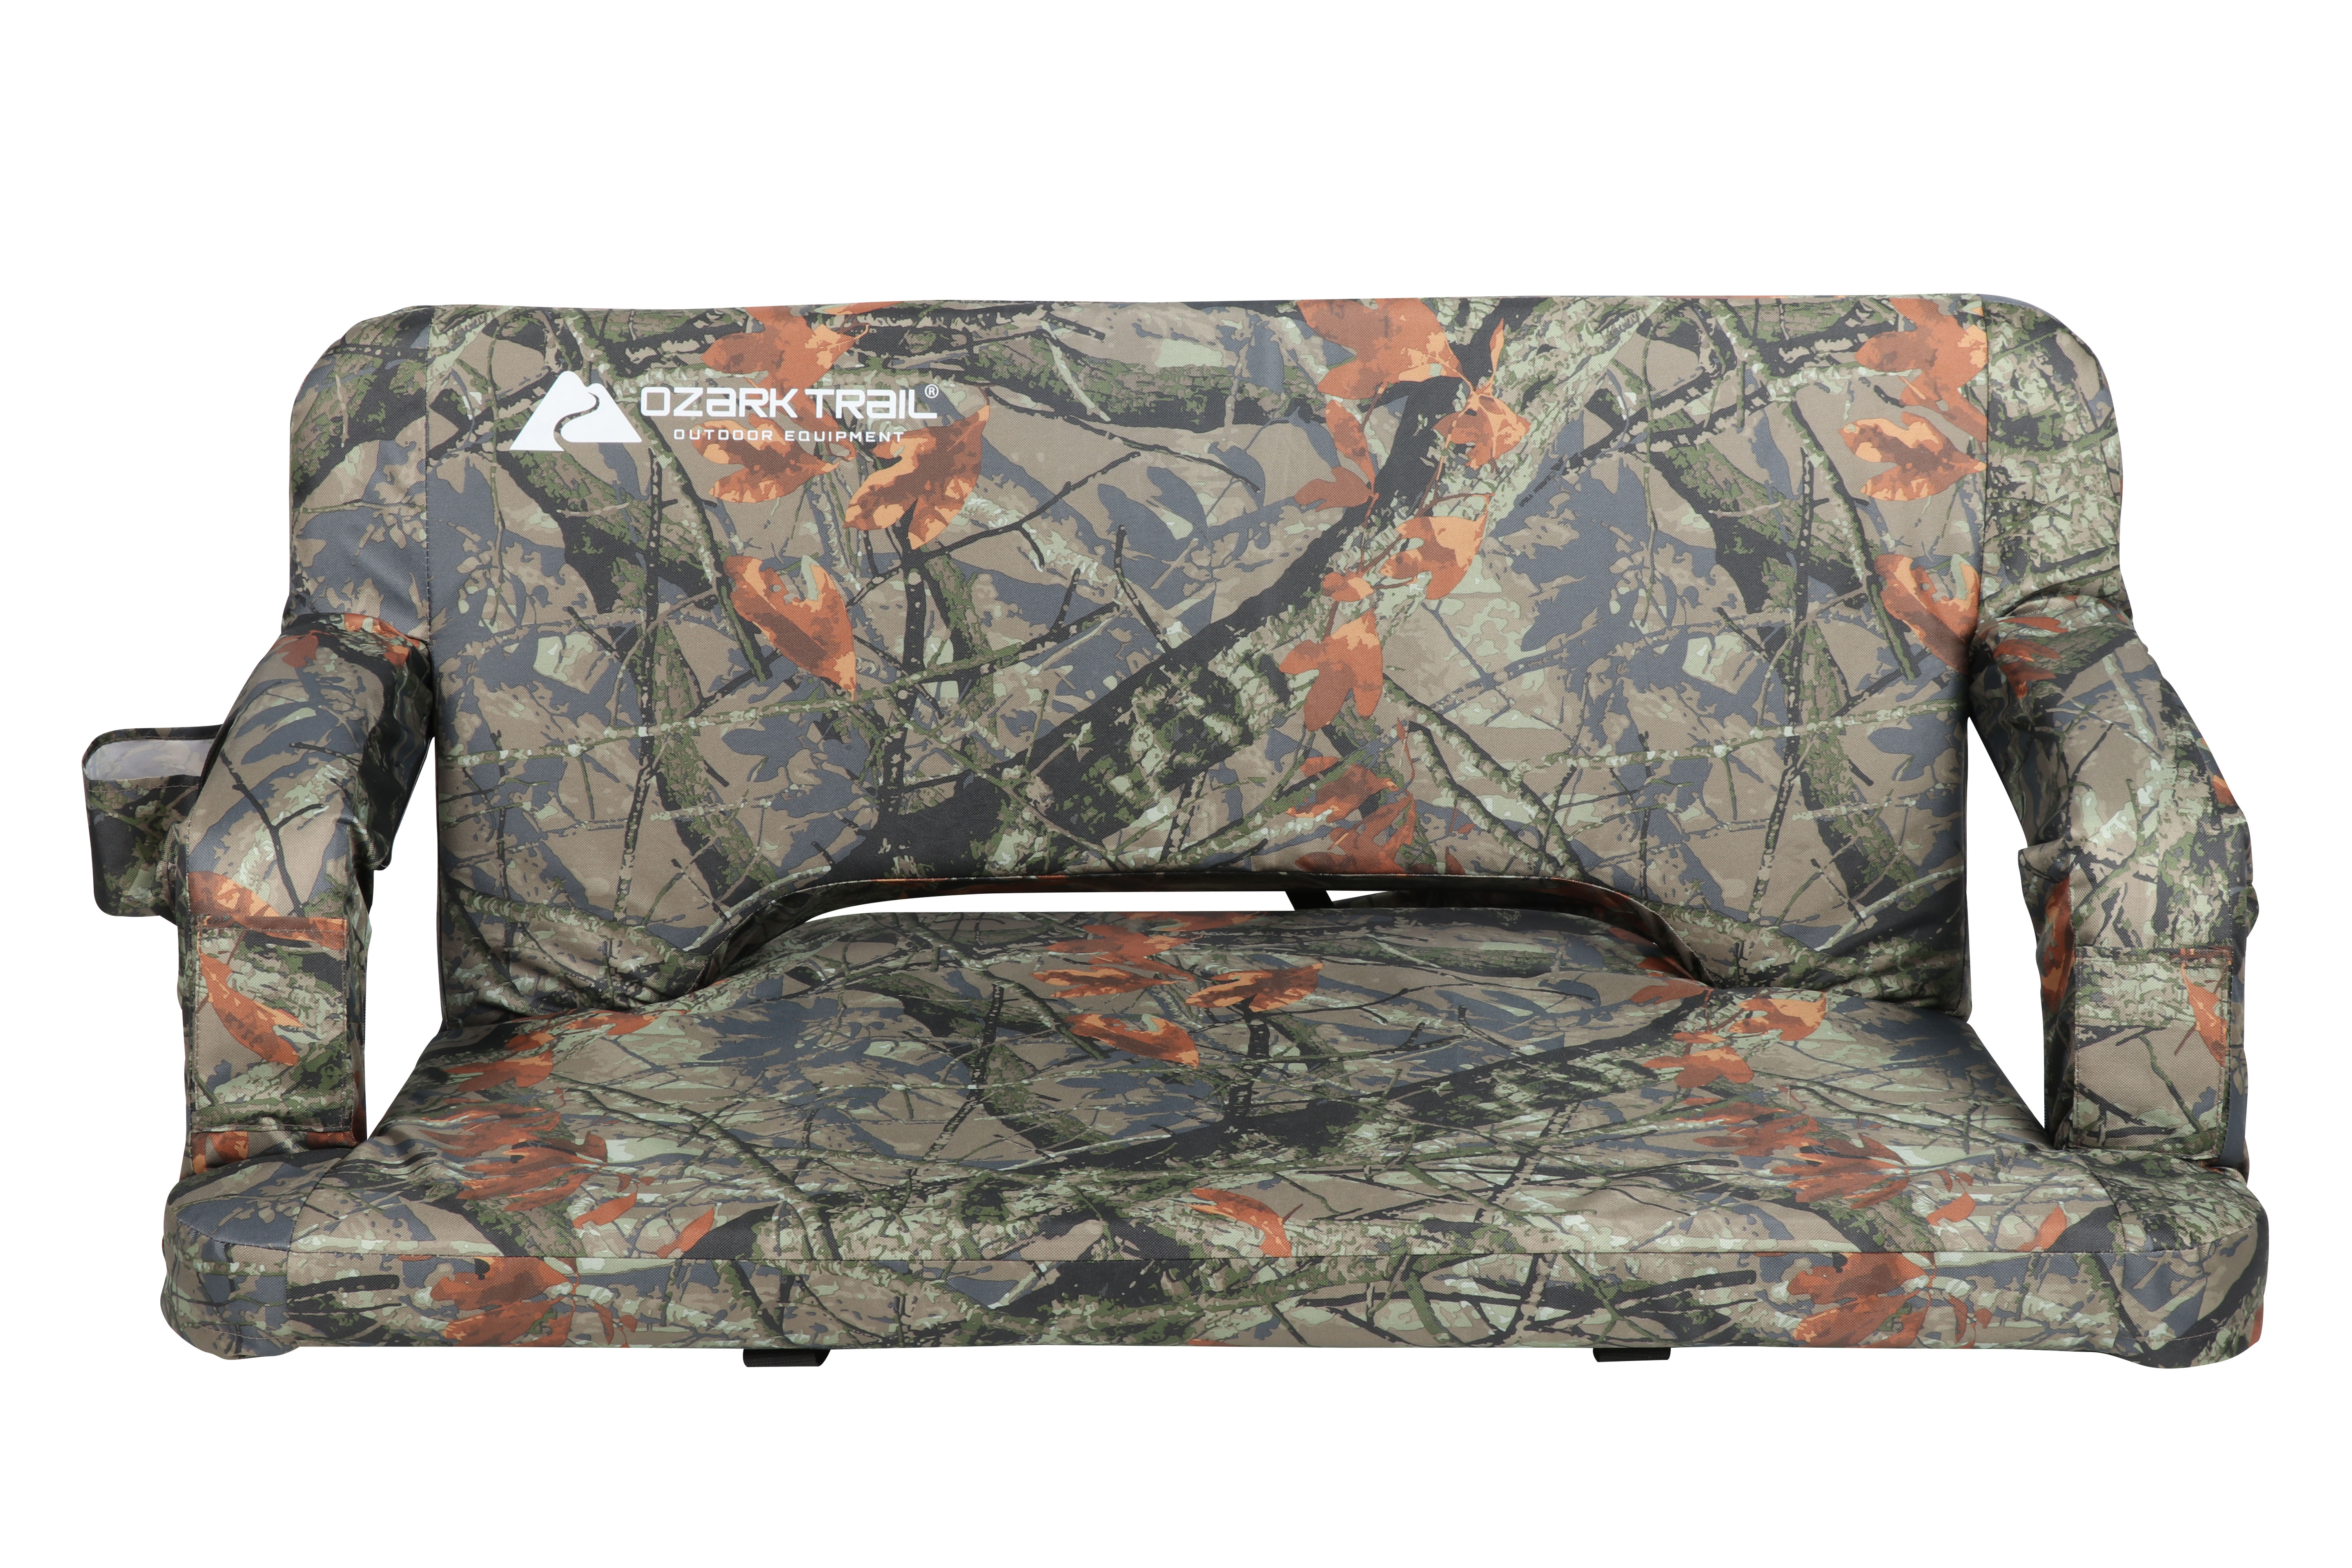 Ozark Trail Easy-Folding Padded Outdoor Tailgating Couch, Camo Green - image 3 of 8